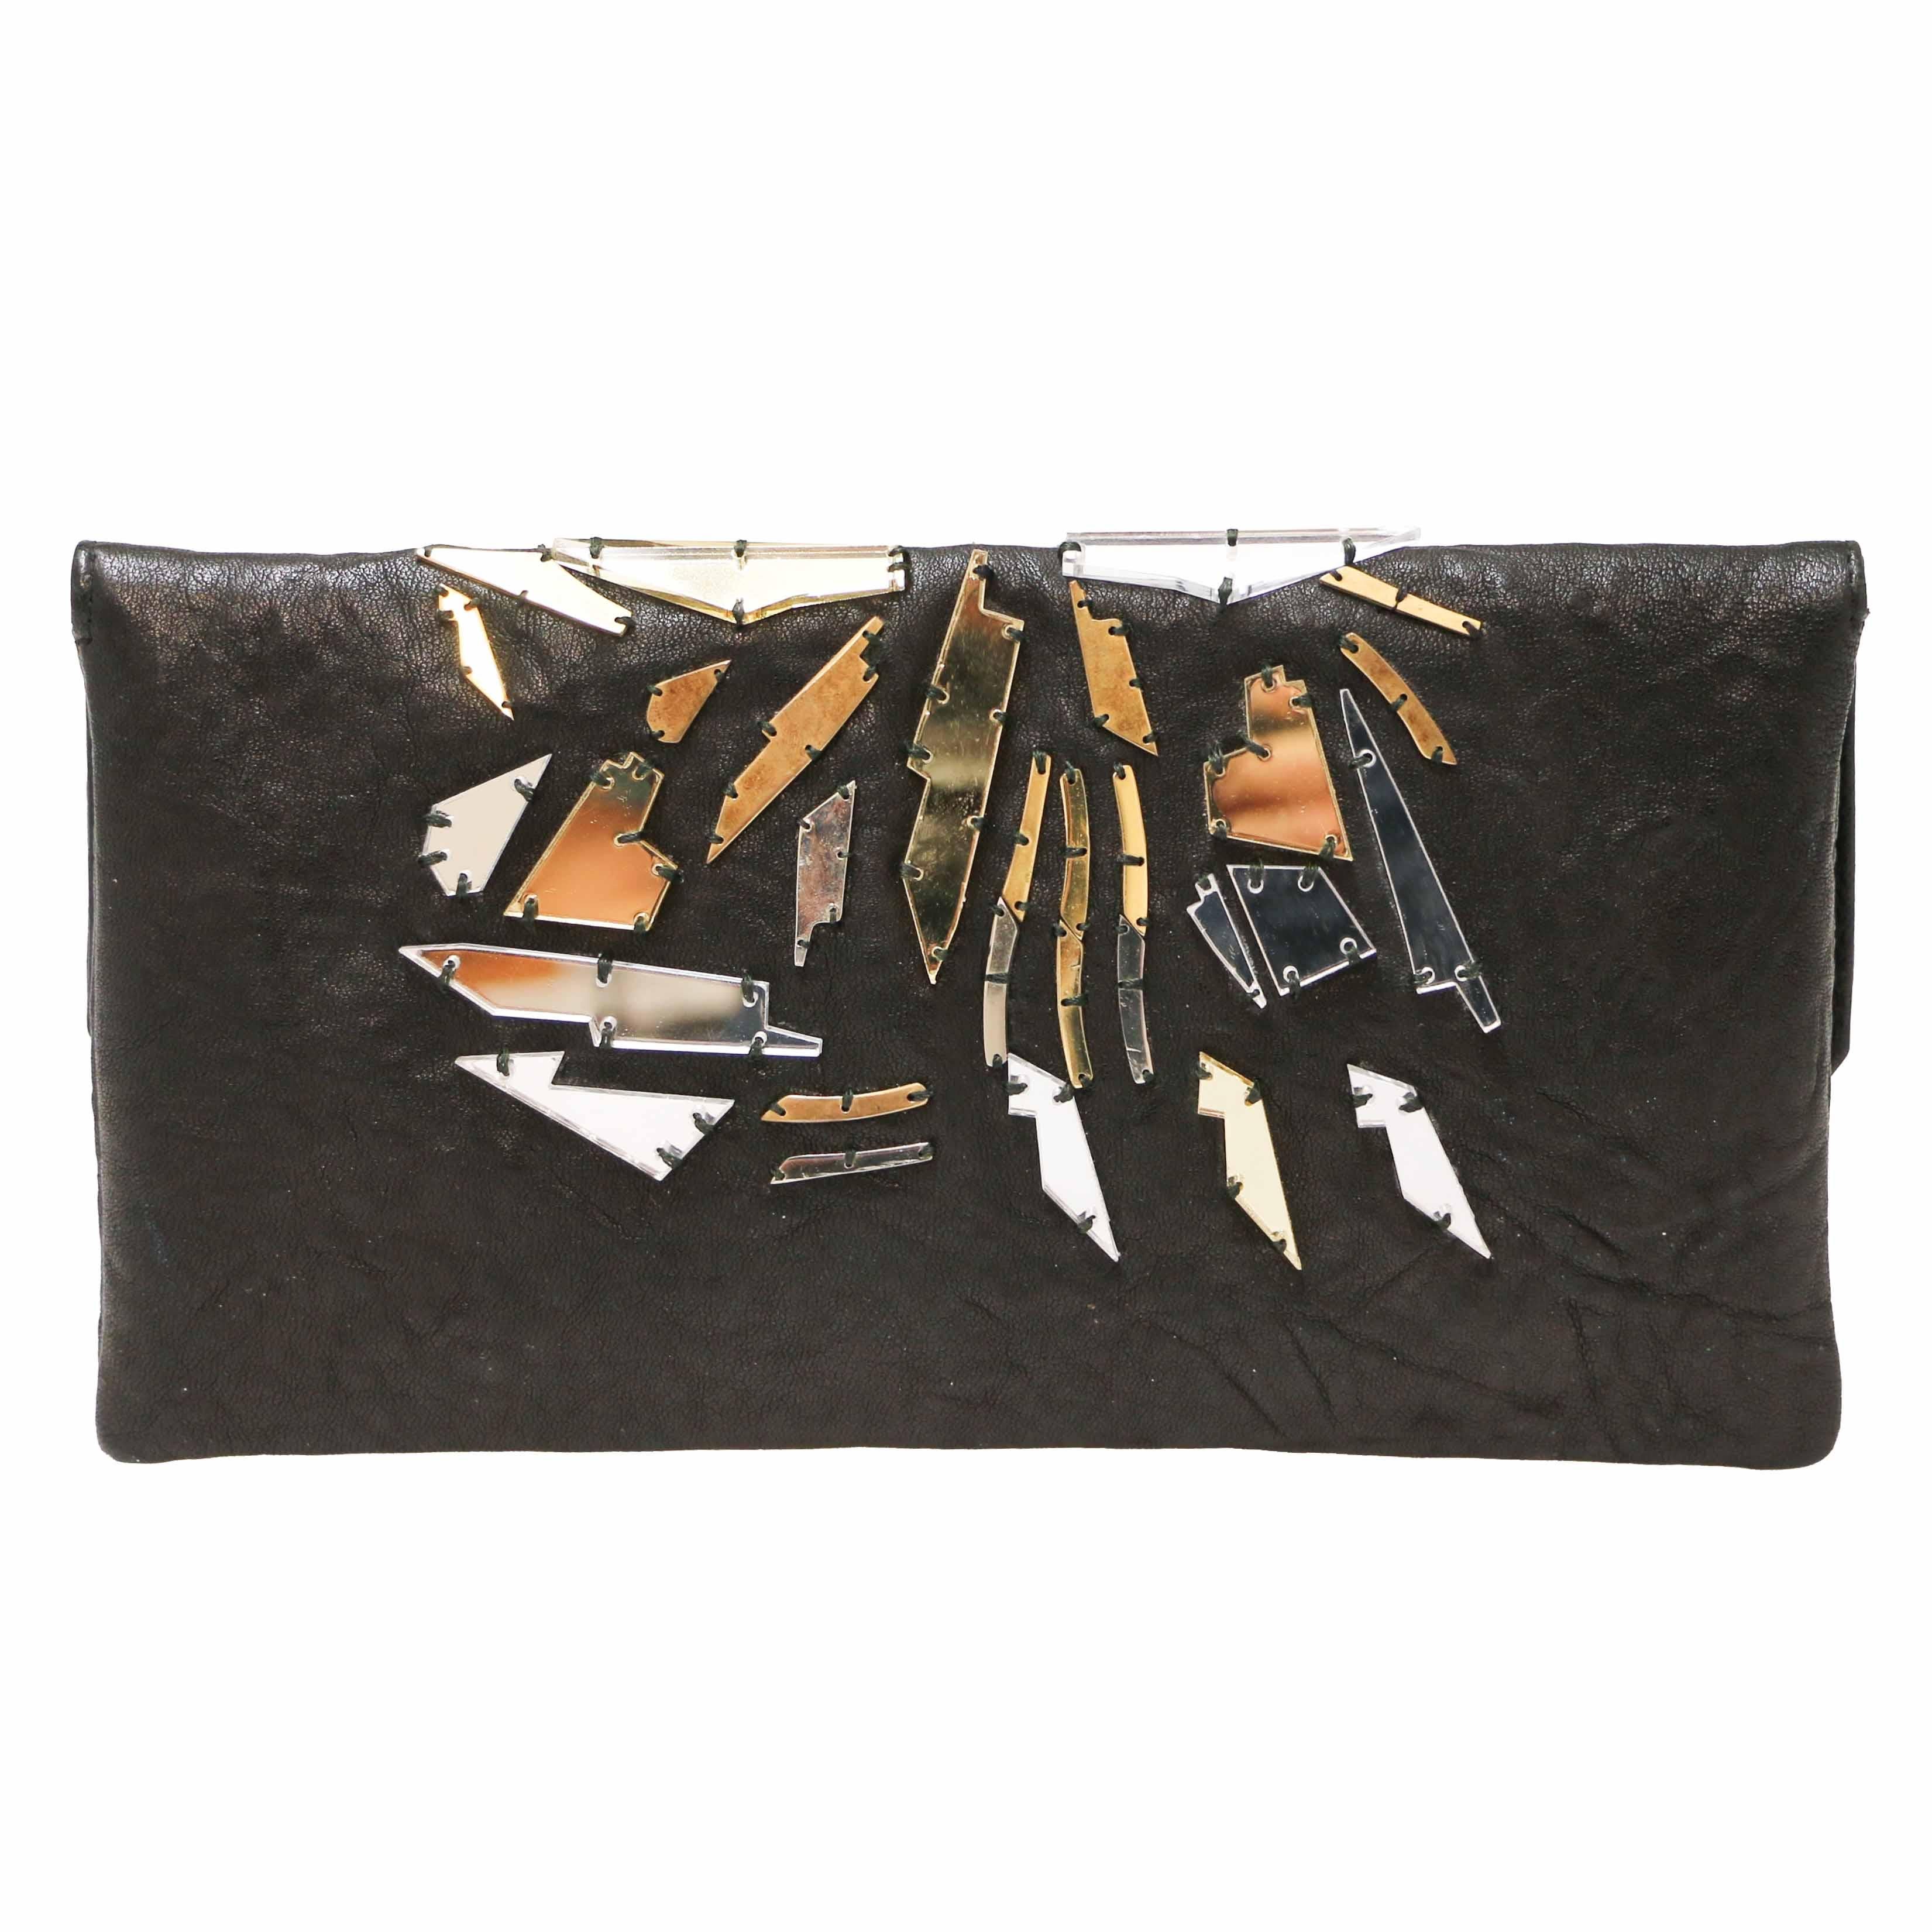 Superb black clutch from Balmain in black aged leather with mirrors

Condition: very good
Made in France
Collection: evening clutches
Materials: aged lamb leather
Interior: lining in black leather
Colors: black, mirrors: silver, aged gold
Magnet